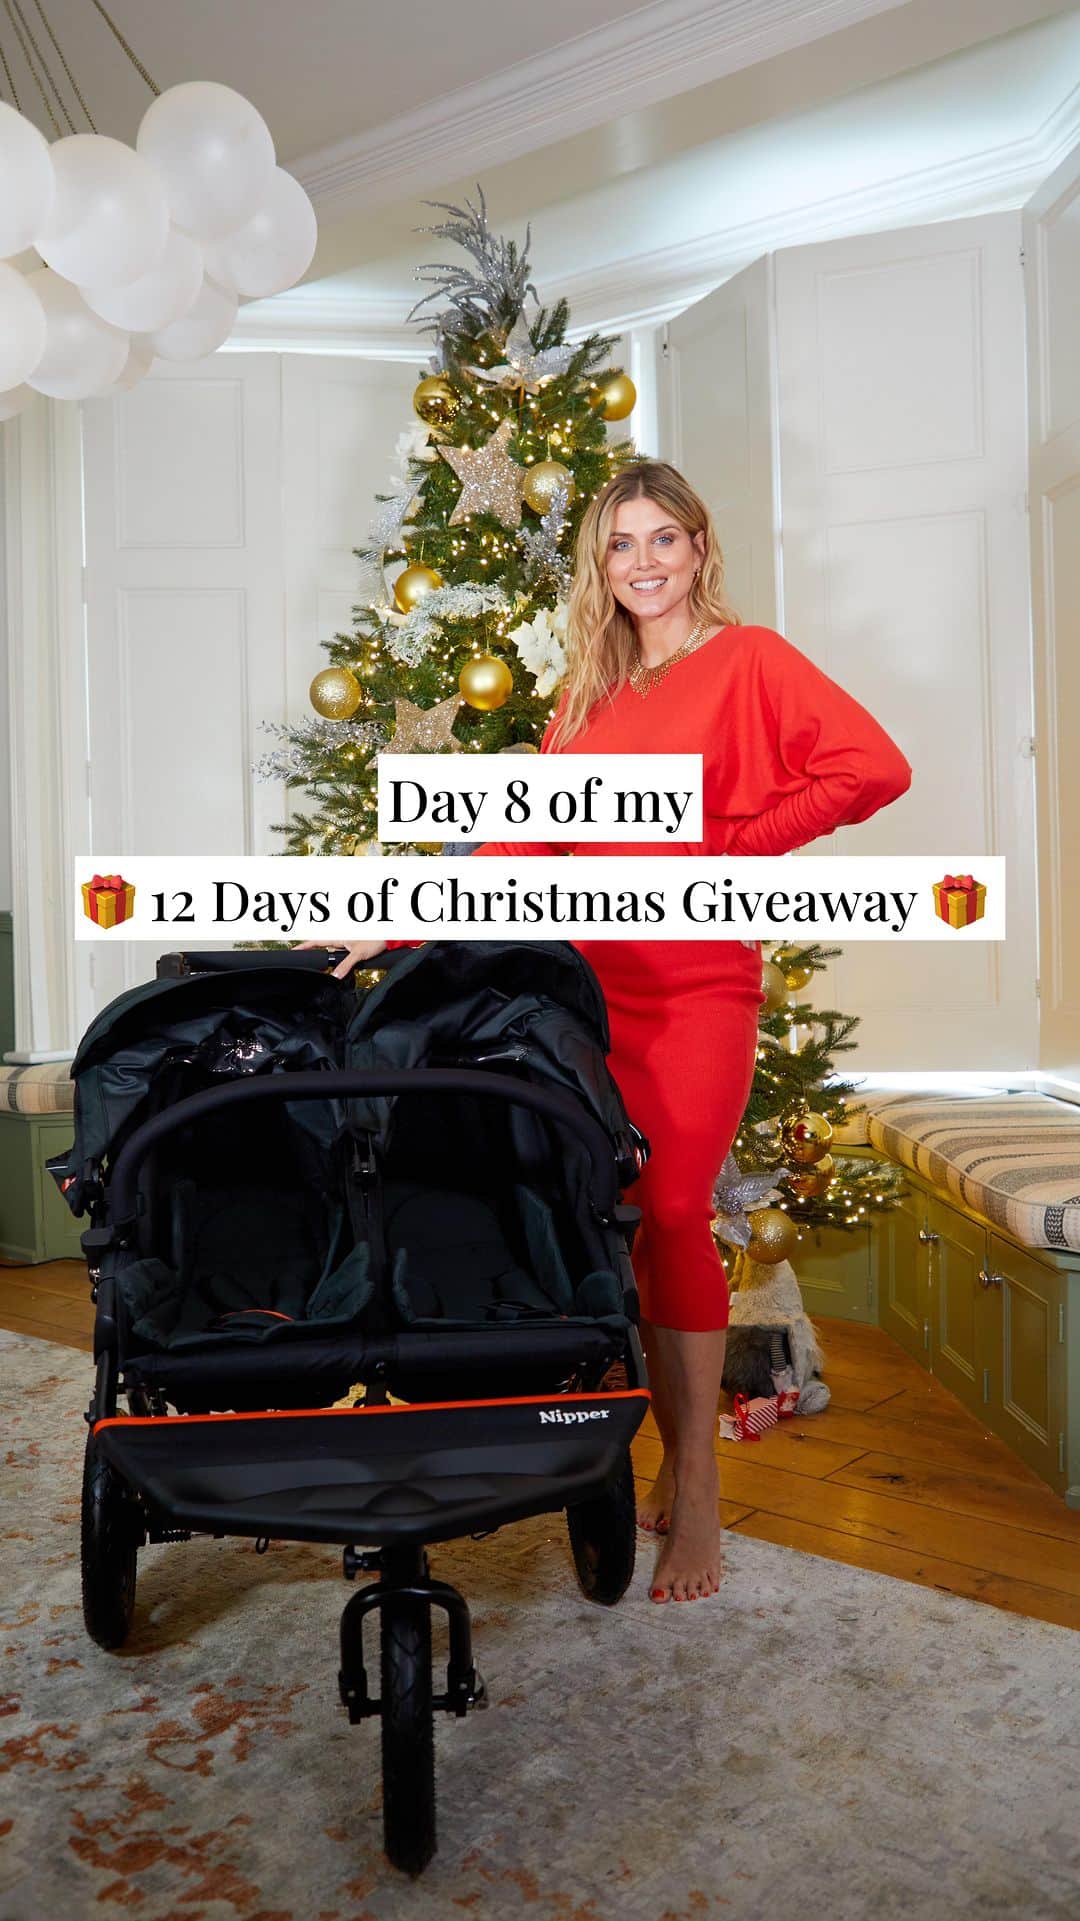 Ashley Jamesのインスタグラム：「**CLOSED** ad ADVENT GIVEAWAY DAY 8: win a  double stroller from @outnabout_official 🤶🏼❤️  I am SO excited about this giveaway- you know how much I love my double buggy! Well this is their brand new upgraded version: the Nipper v5. Honestly as a mama of 2 this has been the BEST thing - it’s easy to push, suitable from newborn (I got the carrycot attachment!), the big wheels make it easy to move around on different grounds! It also fits through any accessible door!  So to win you : ✨ must be following me and @outnabout_official  ✨ LIKE and COMMENT why you’d love to win and TAG A FRIEND you think would also love to win* ✨You can comment as many times as you like - the winner will be selected by random generator, so the more you comment the more chance of winning! ✨I will announce the winner in 48 hours, announcing on stories and messaging privately asking for your address - and I will do so on this account only. I won’t be asking for bank details so please don’t reply to any fake account if anyone reaches out other than my page.  ✨ Must be UK based   The winner will be picked at midday on the 10th December.   So merry Christmas, thank you, and good luck! ❤️✨」